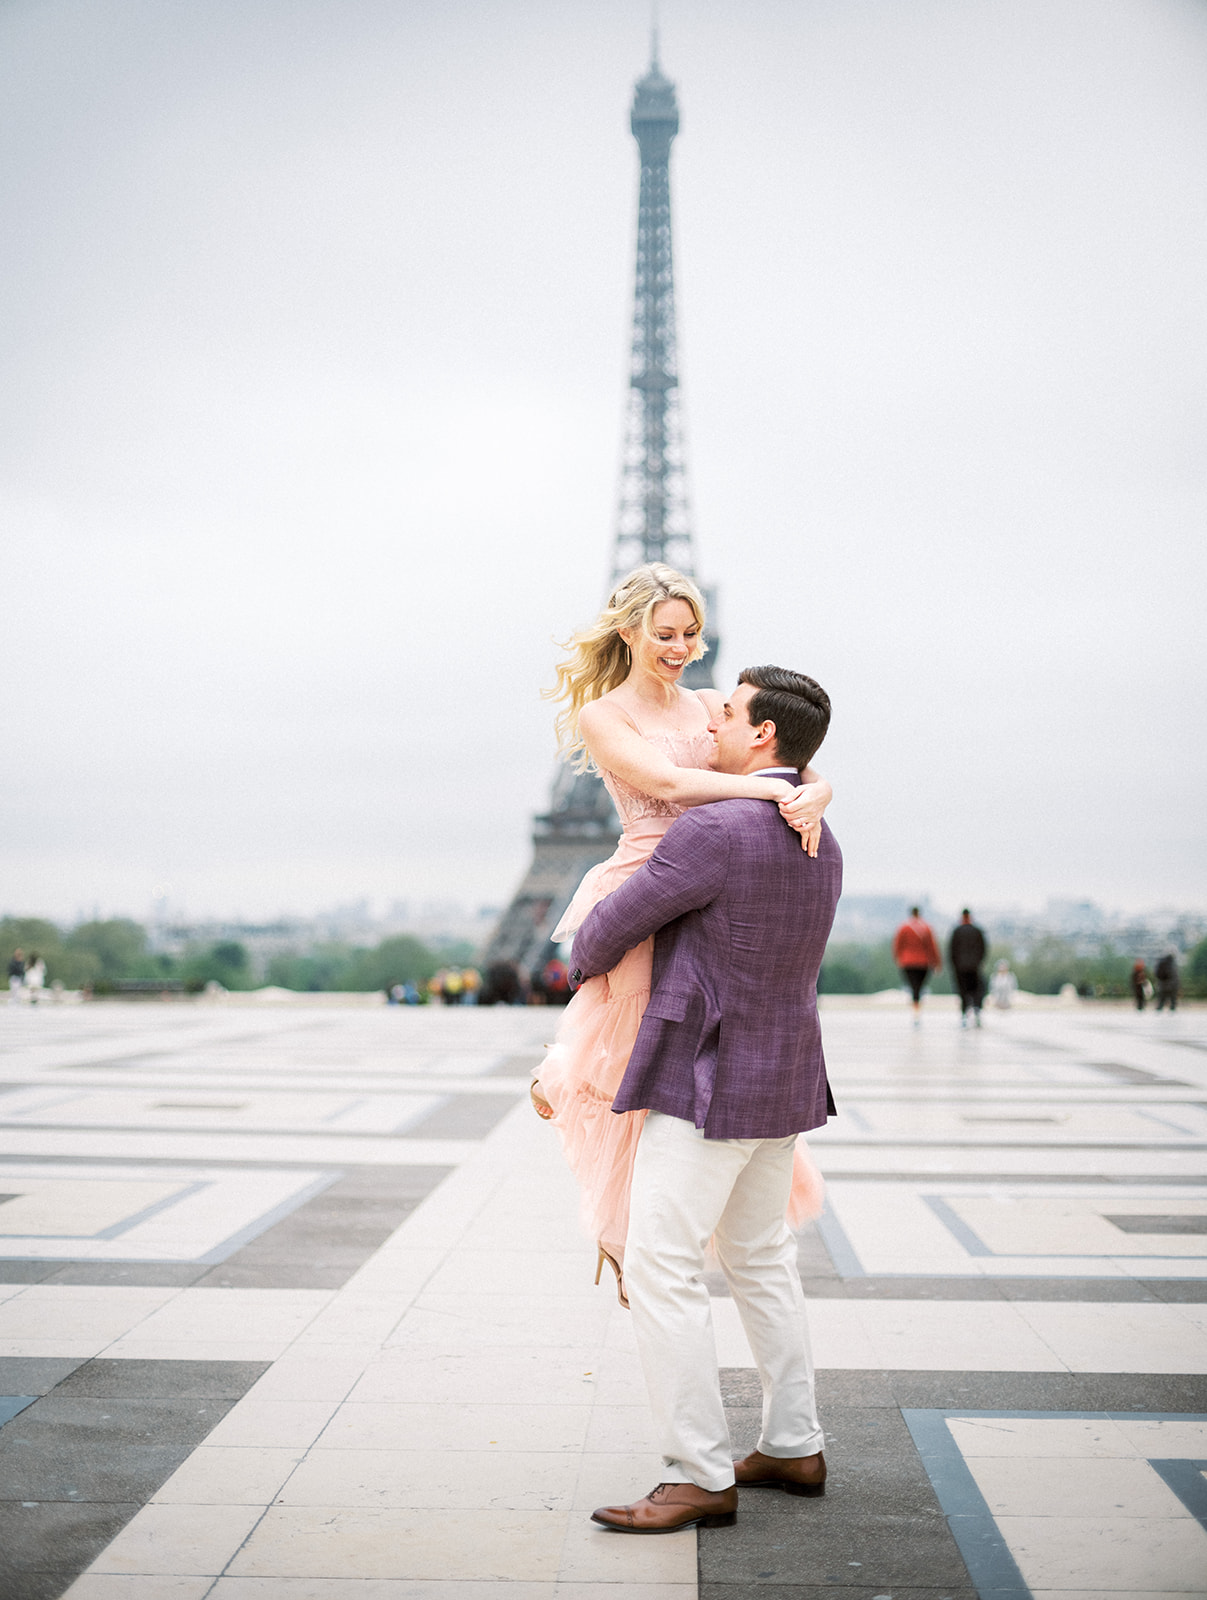 Man picks up woman in front of Eiffel Tower.